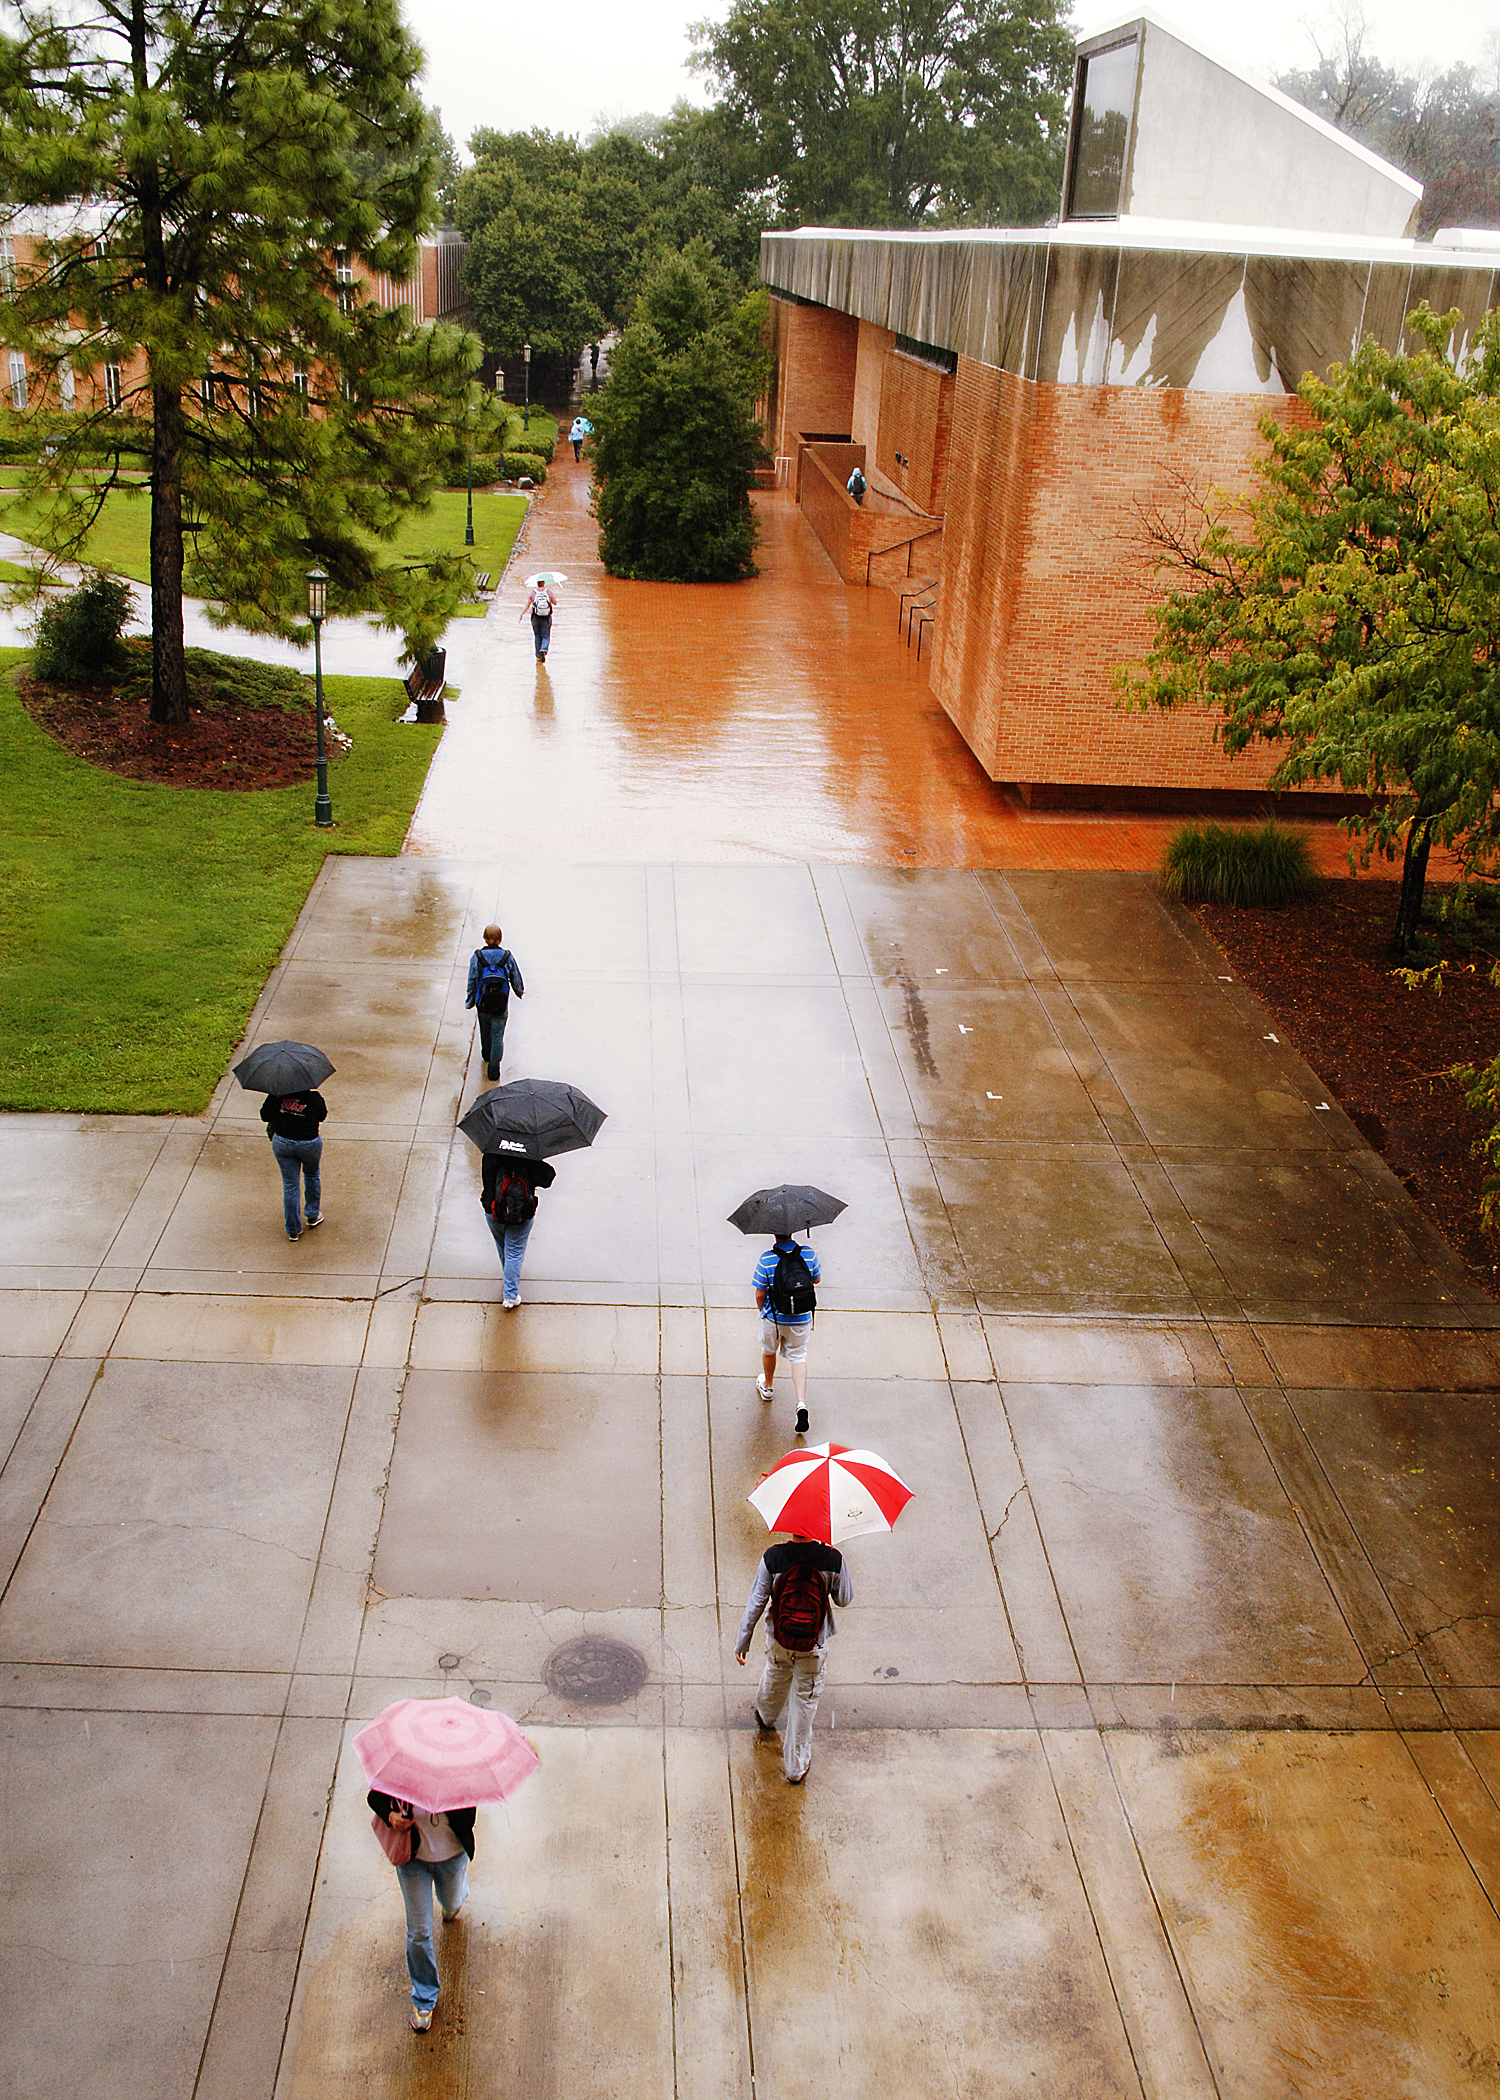 Rowe Arts Building in 2006 on a rainy day from a distance. The sidewalk outside of the building is in the foreground, with students walking with umbrellas.